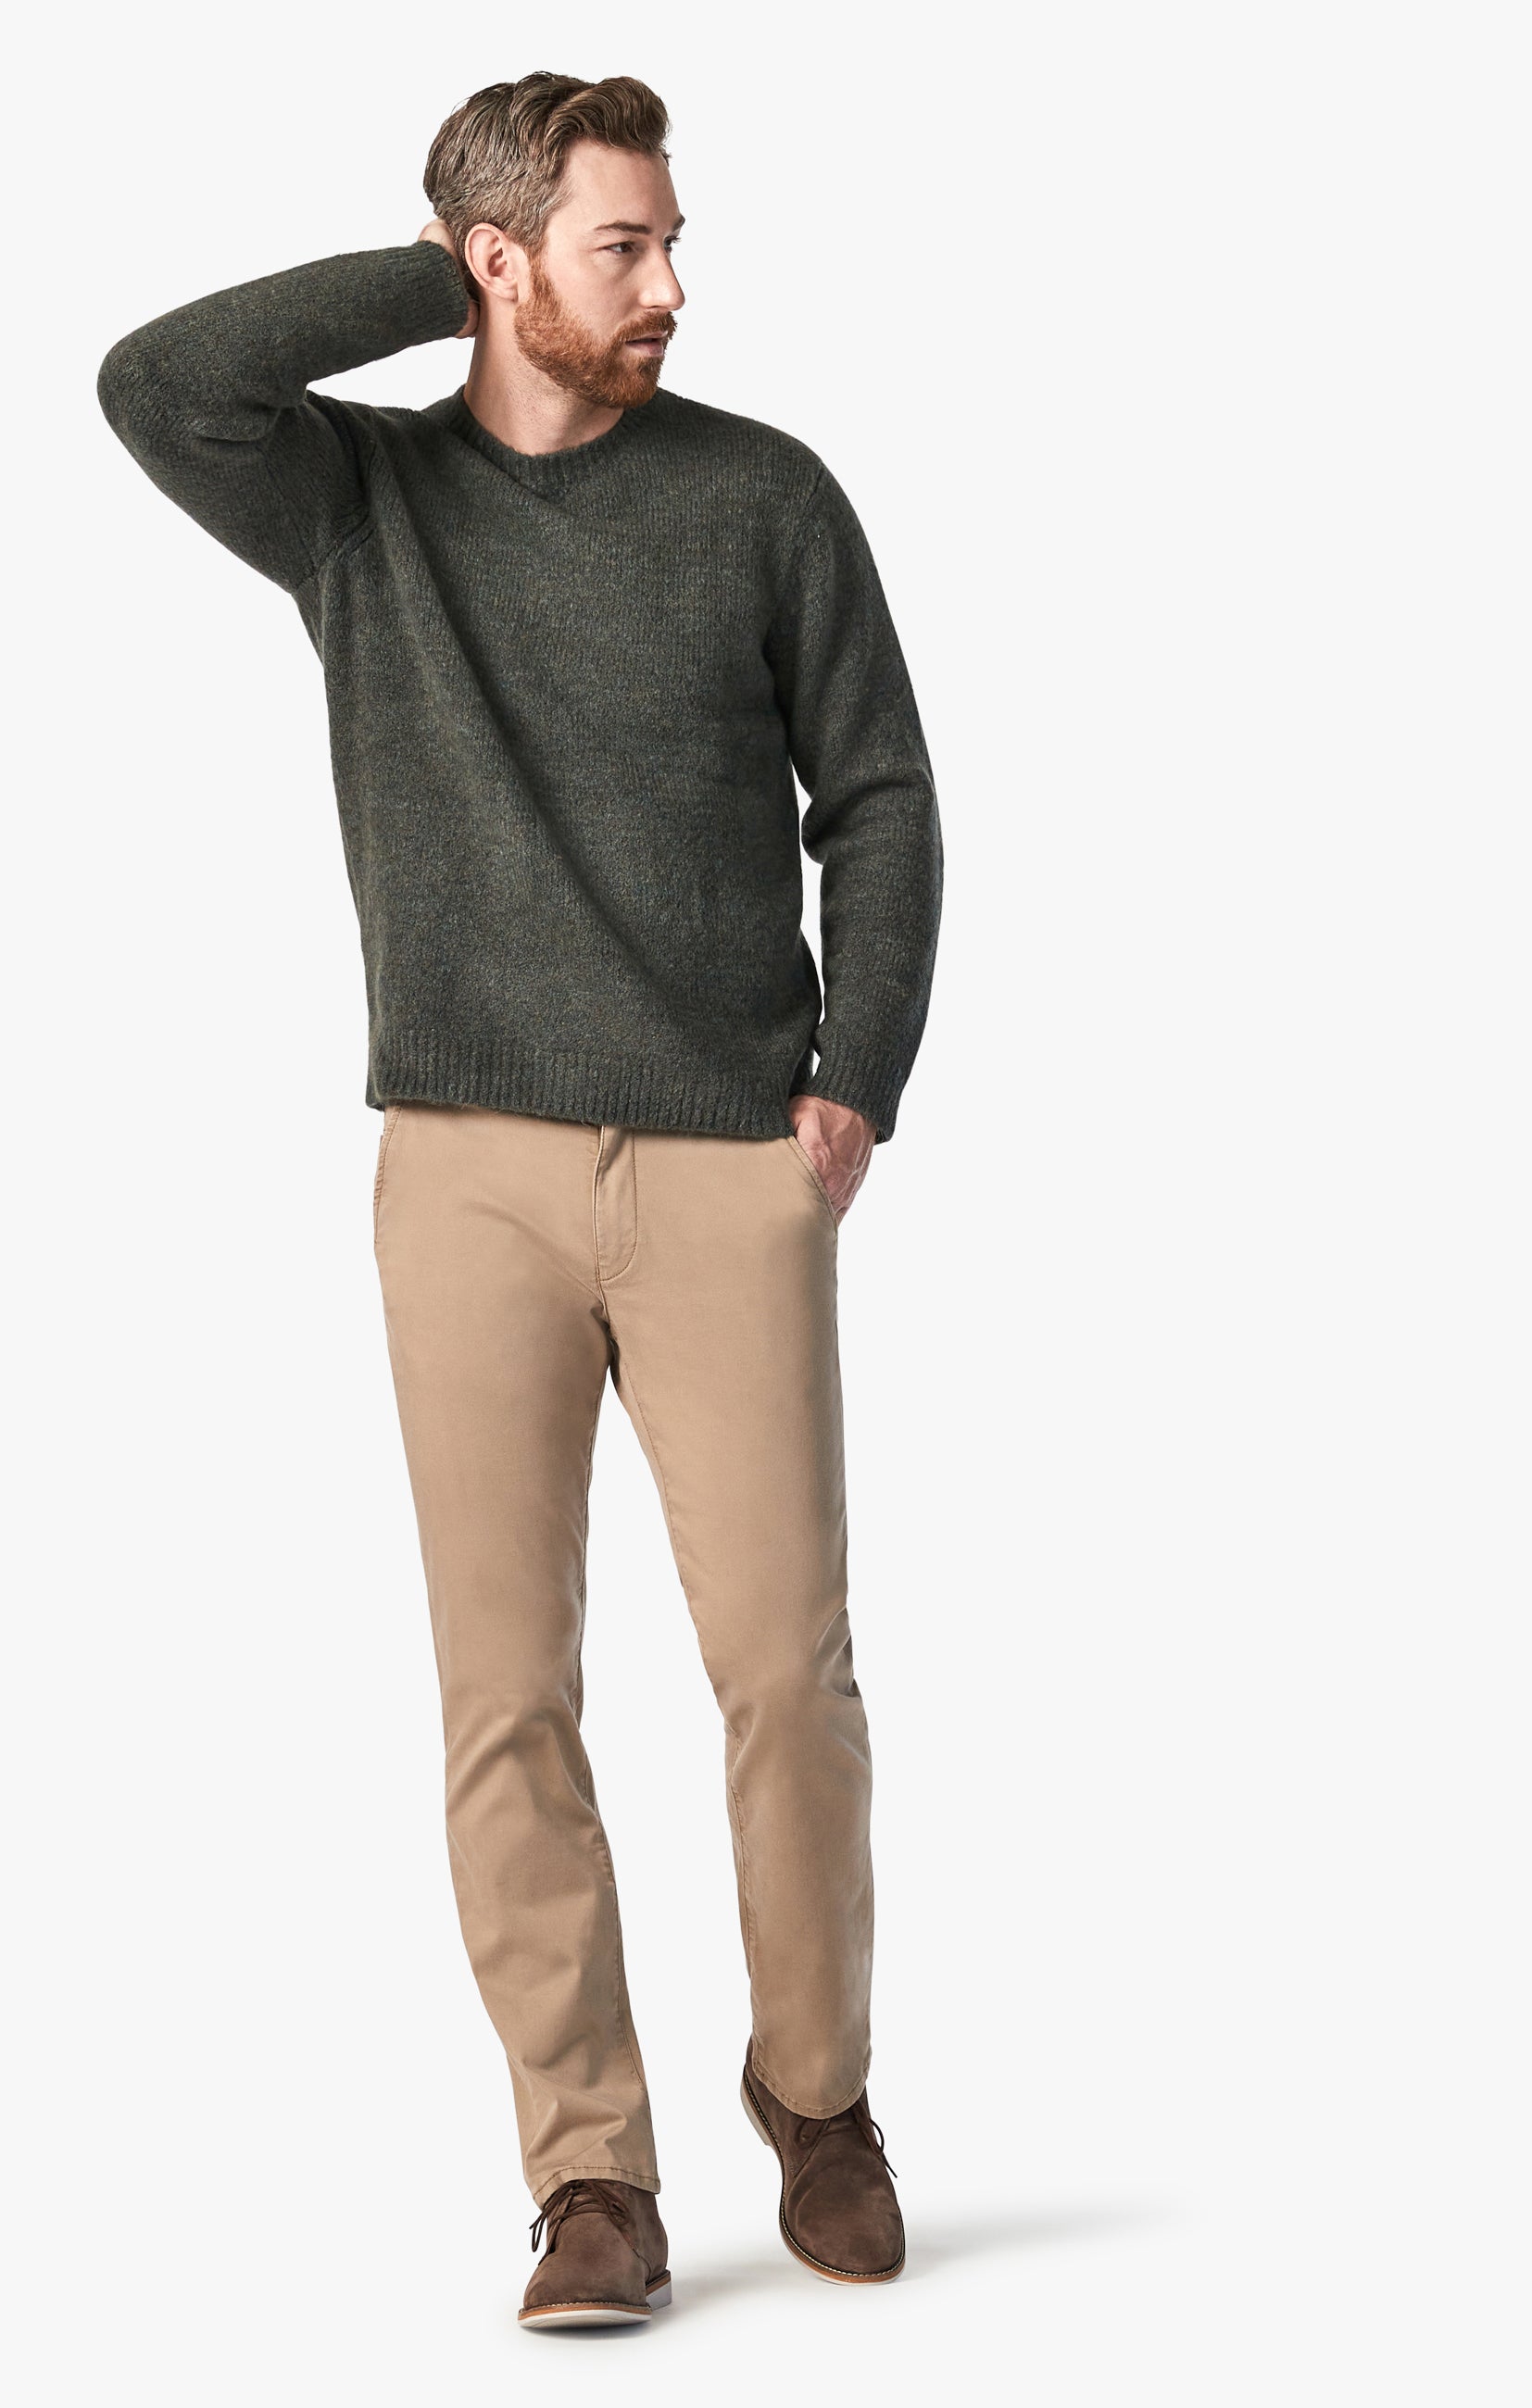 Grey Sweater with Tan Pants Outfits For Men (407 ideas & outfits) |  Lookastic